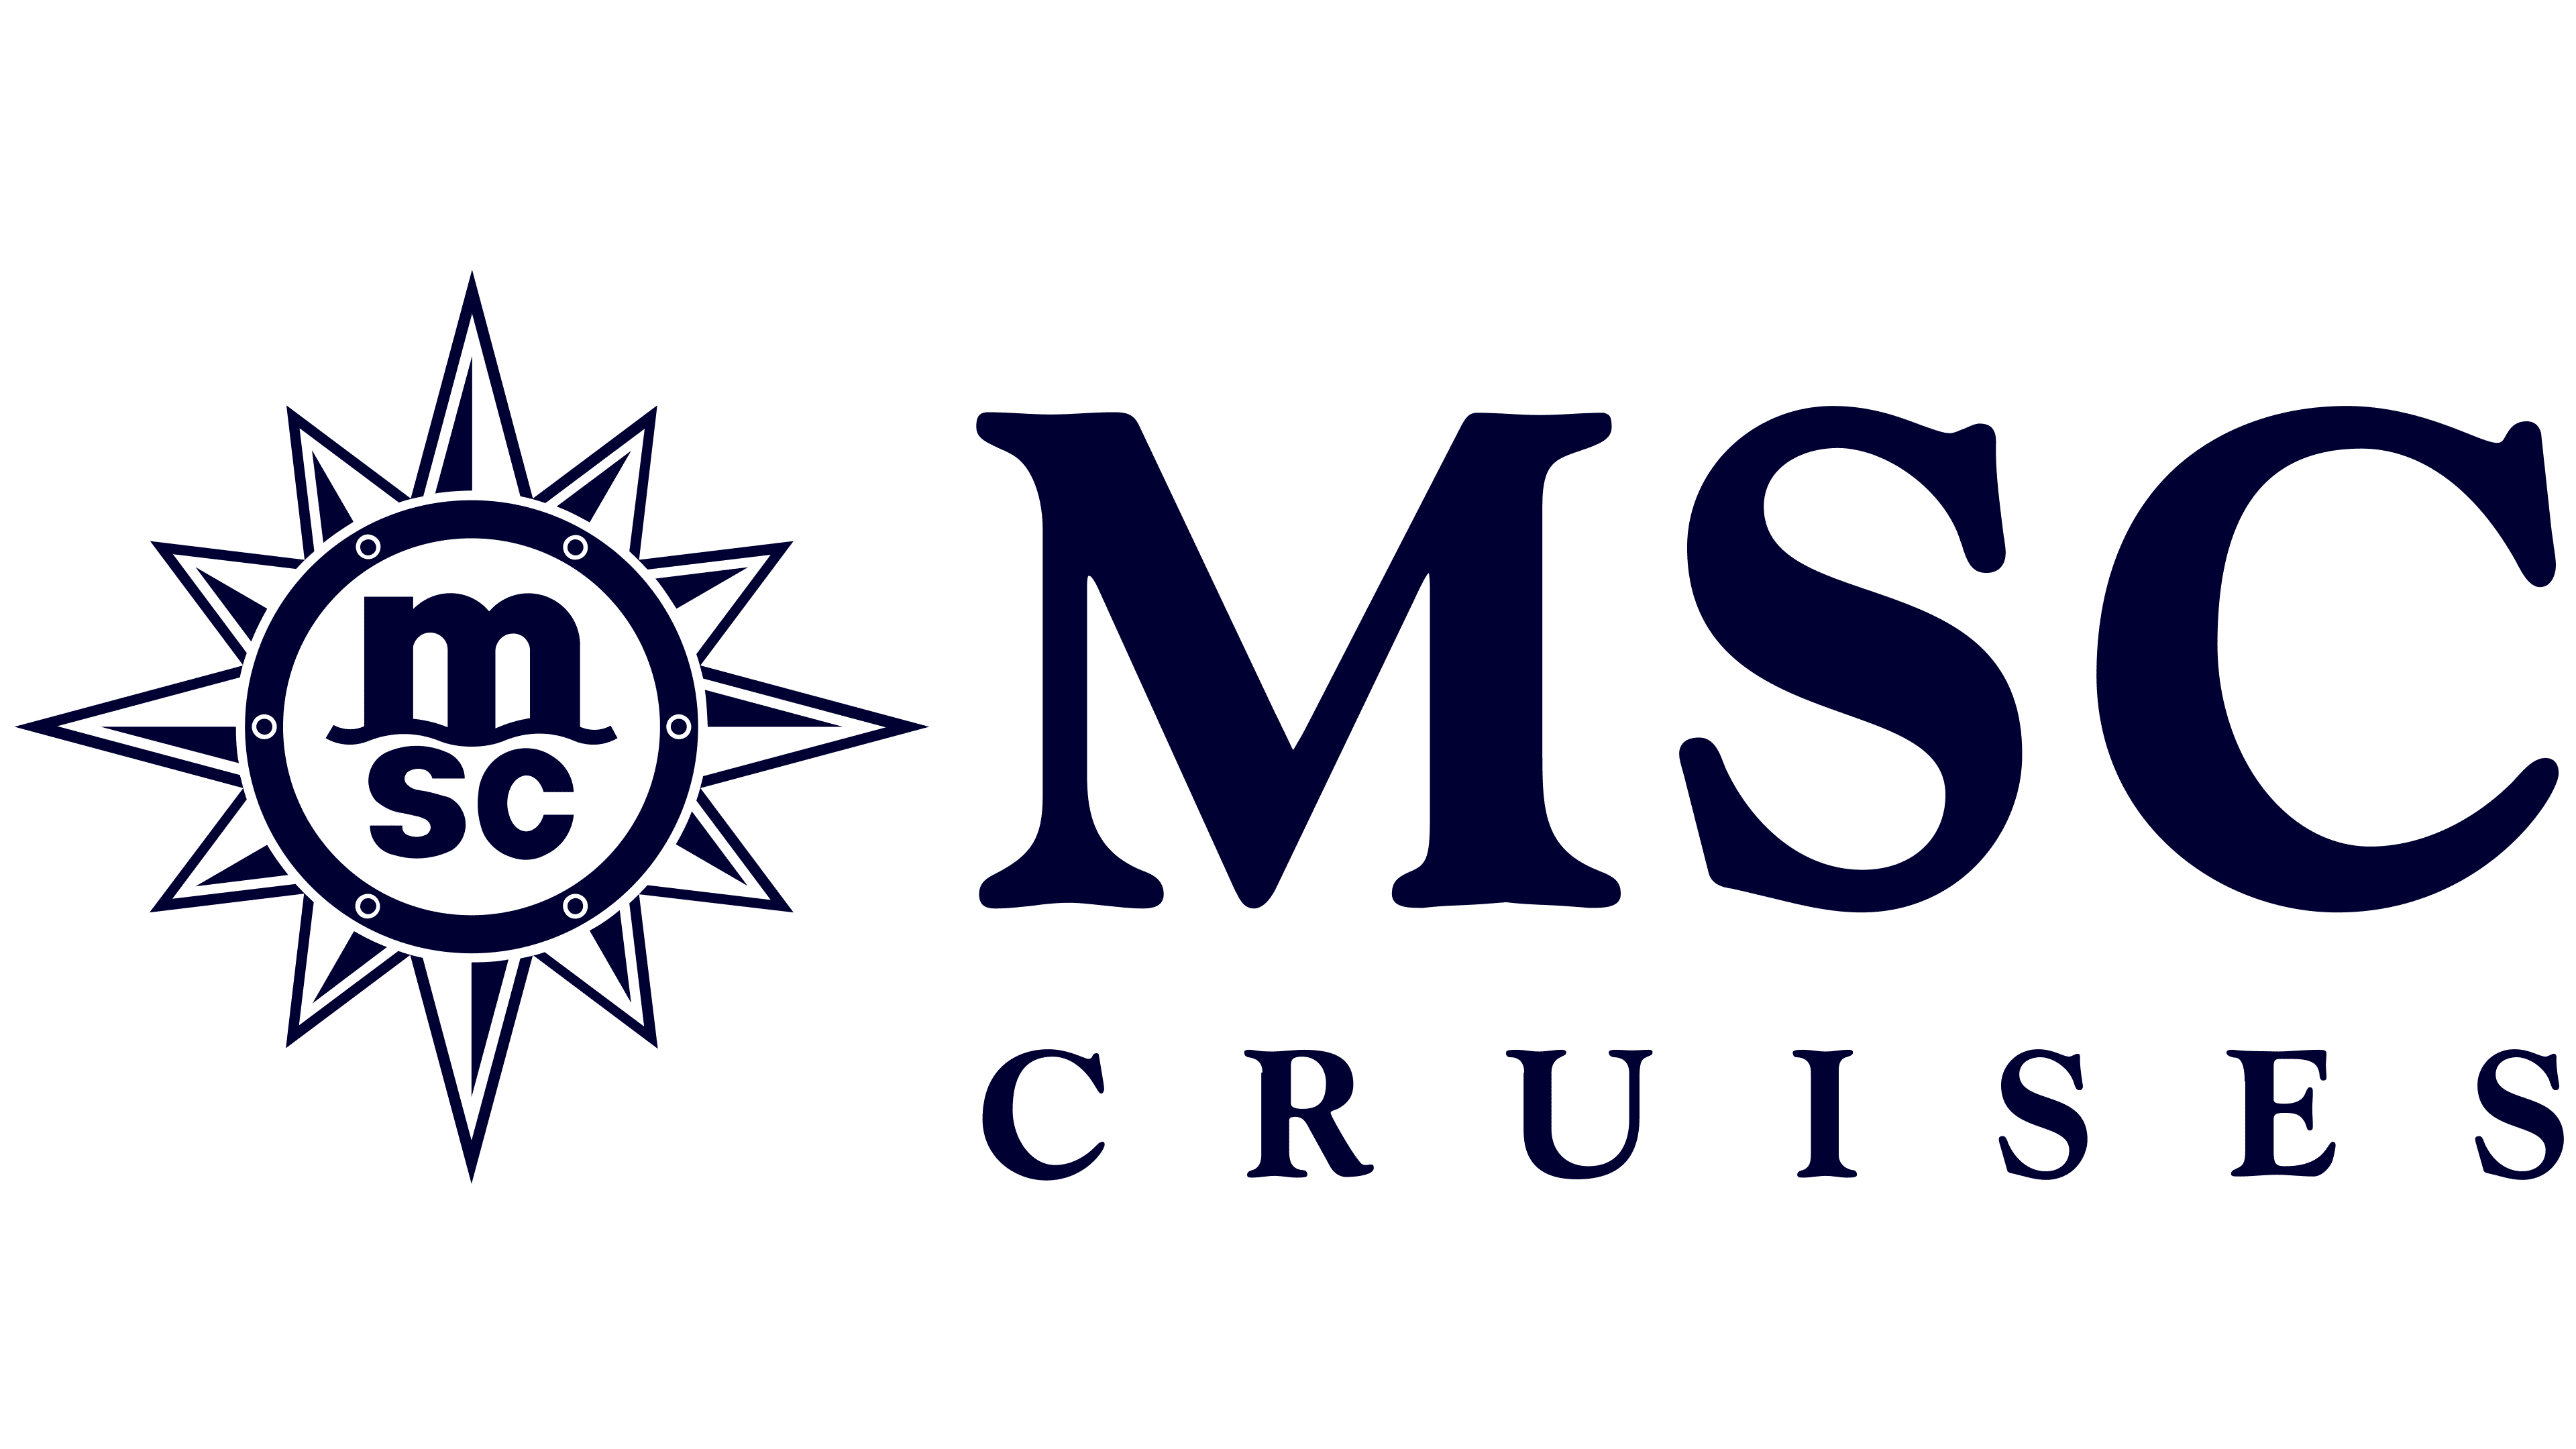 about cruise ship company